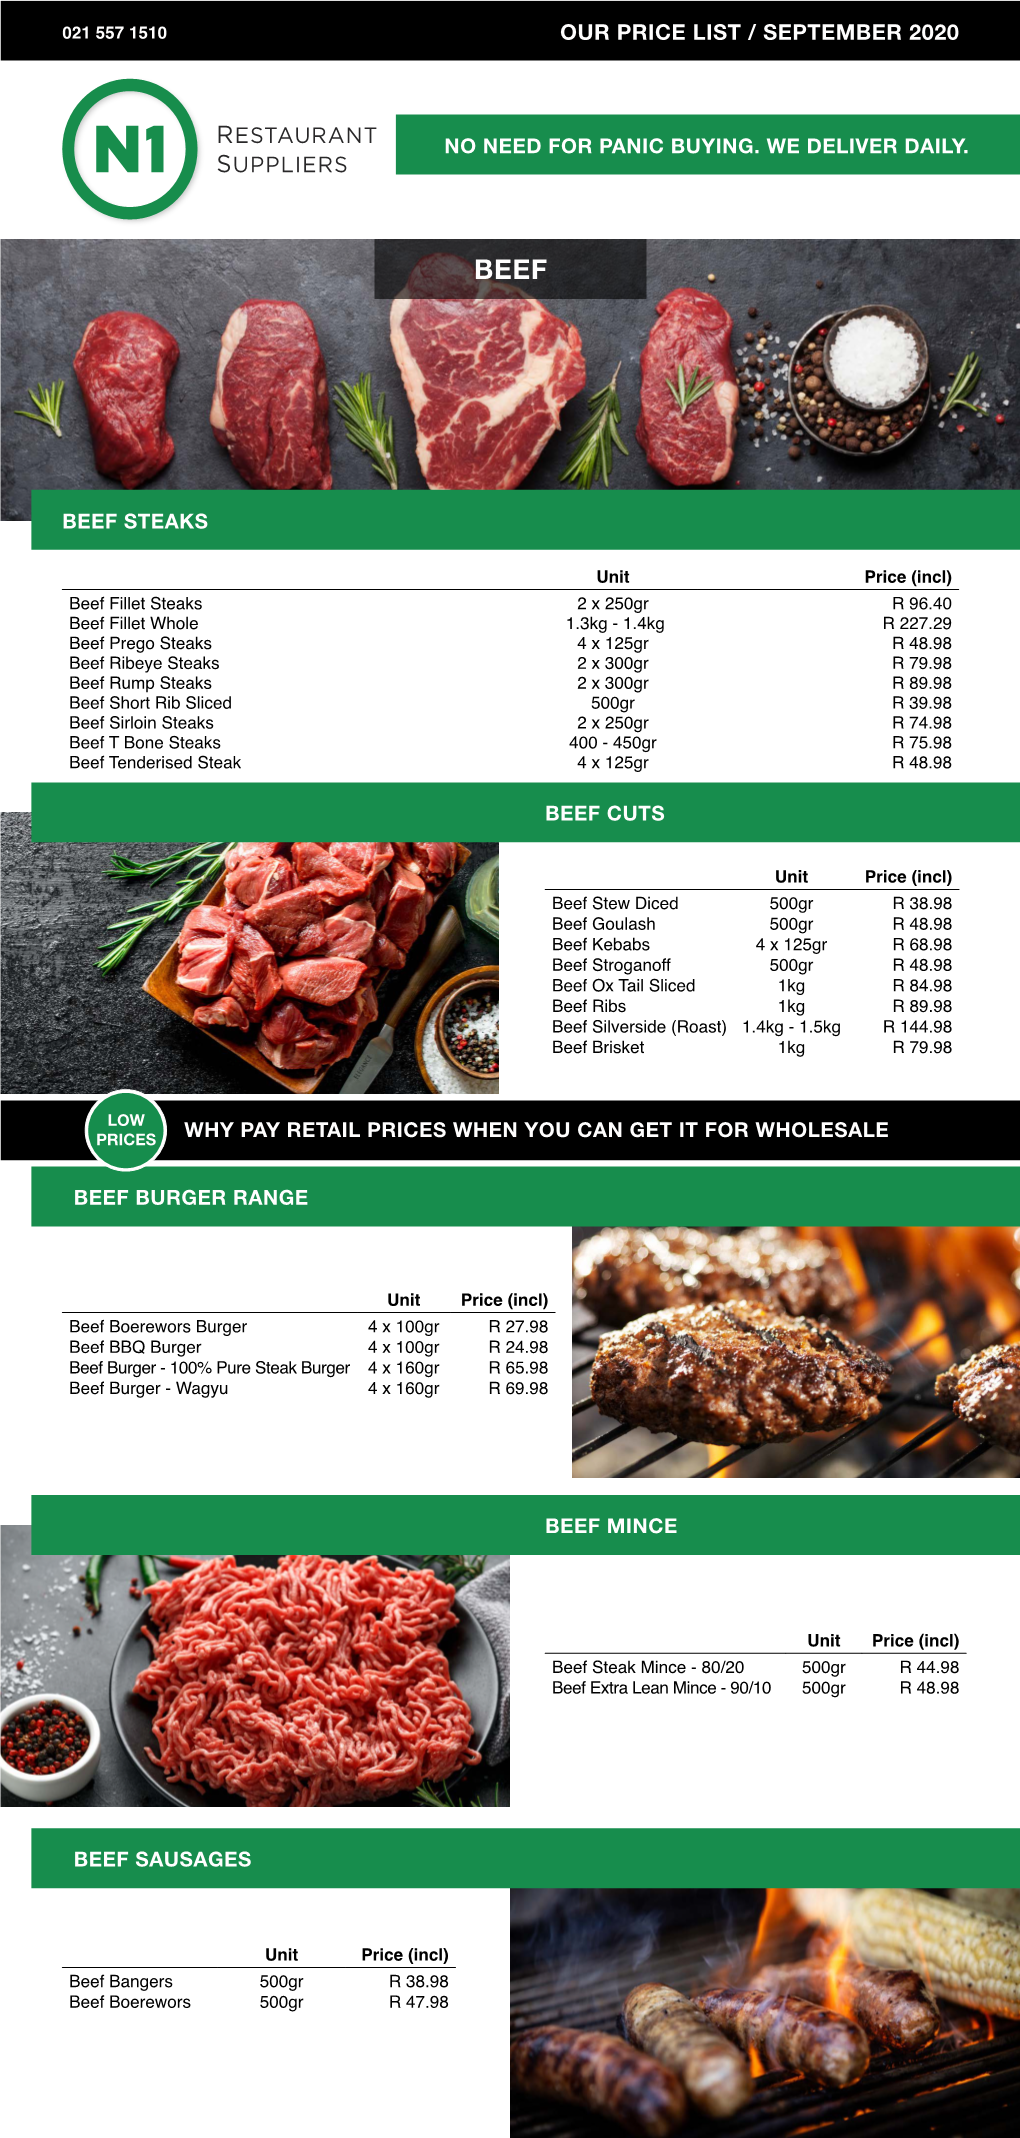 No Need for Panic Buying. We Deliver Daily. Beef Steaks Our Price List / September 2020 Beef Cuts Beef Burger Range Beef Mince B